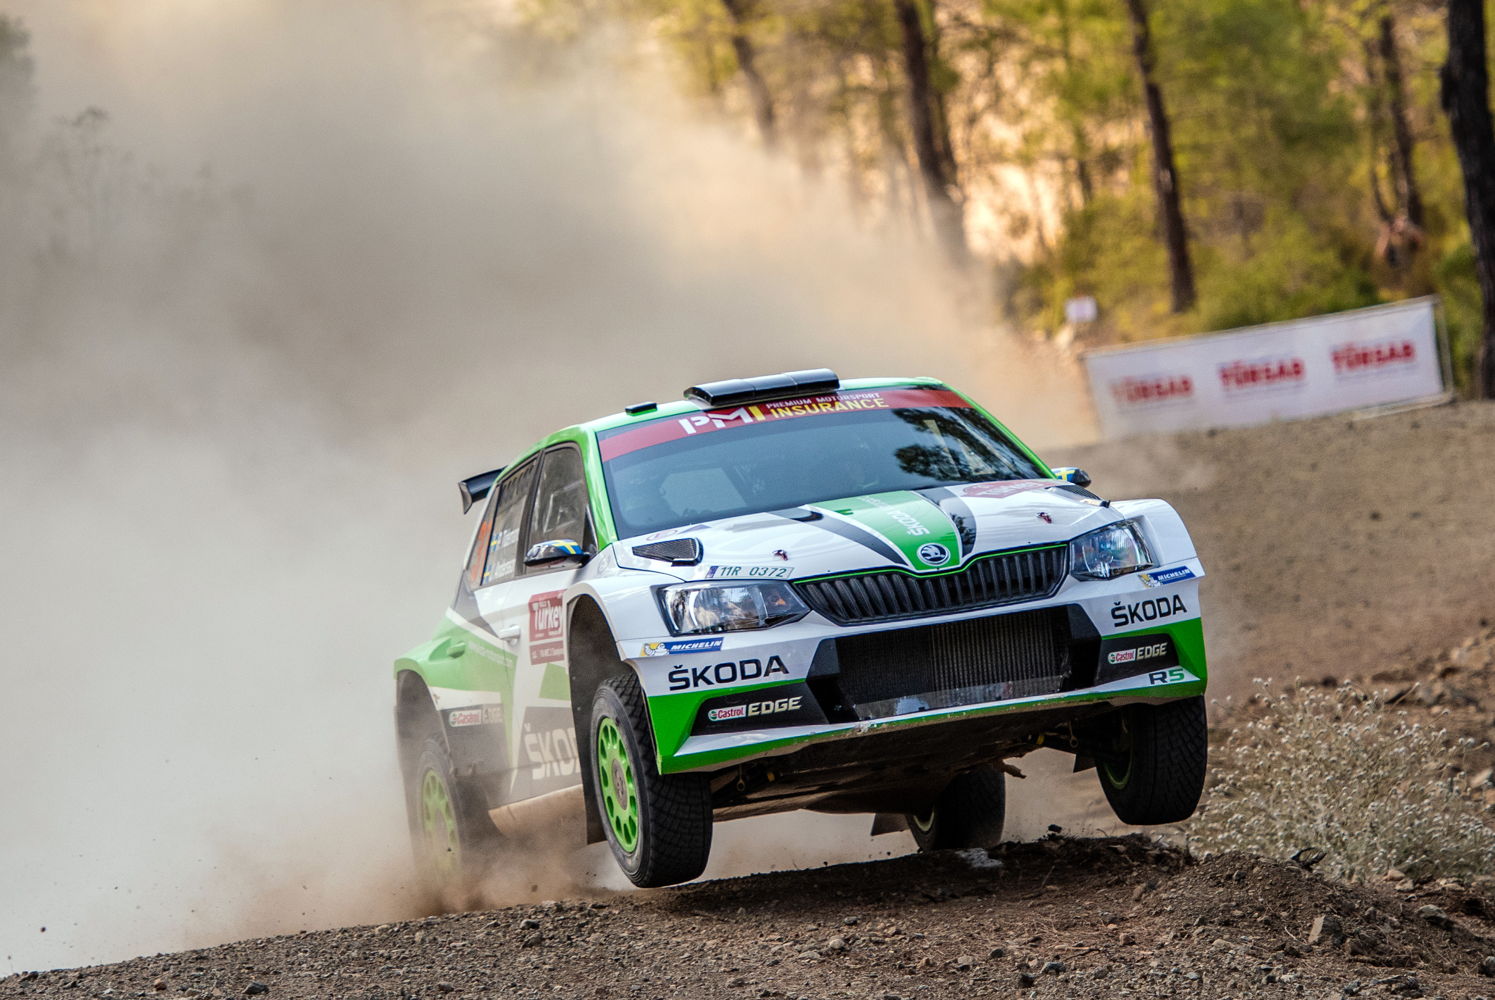 Reigning WRC 2 champions Pontus Tidemand/Jonas Andersson (ŠKODA FABIA R5) want to repeat their last year's WRC 2 victory at the upcoming Rally Wales GB